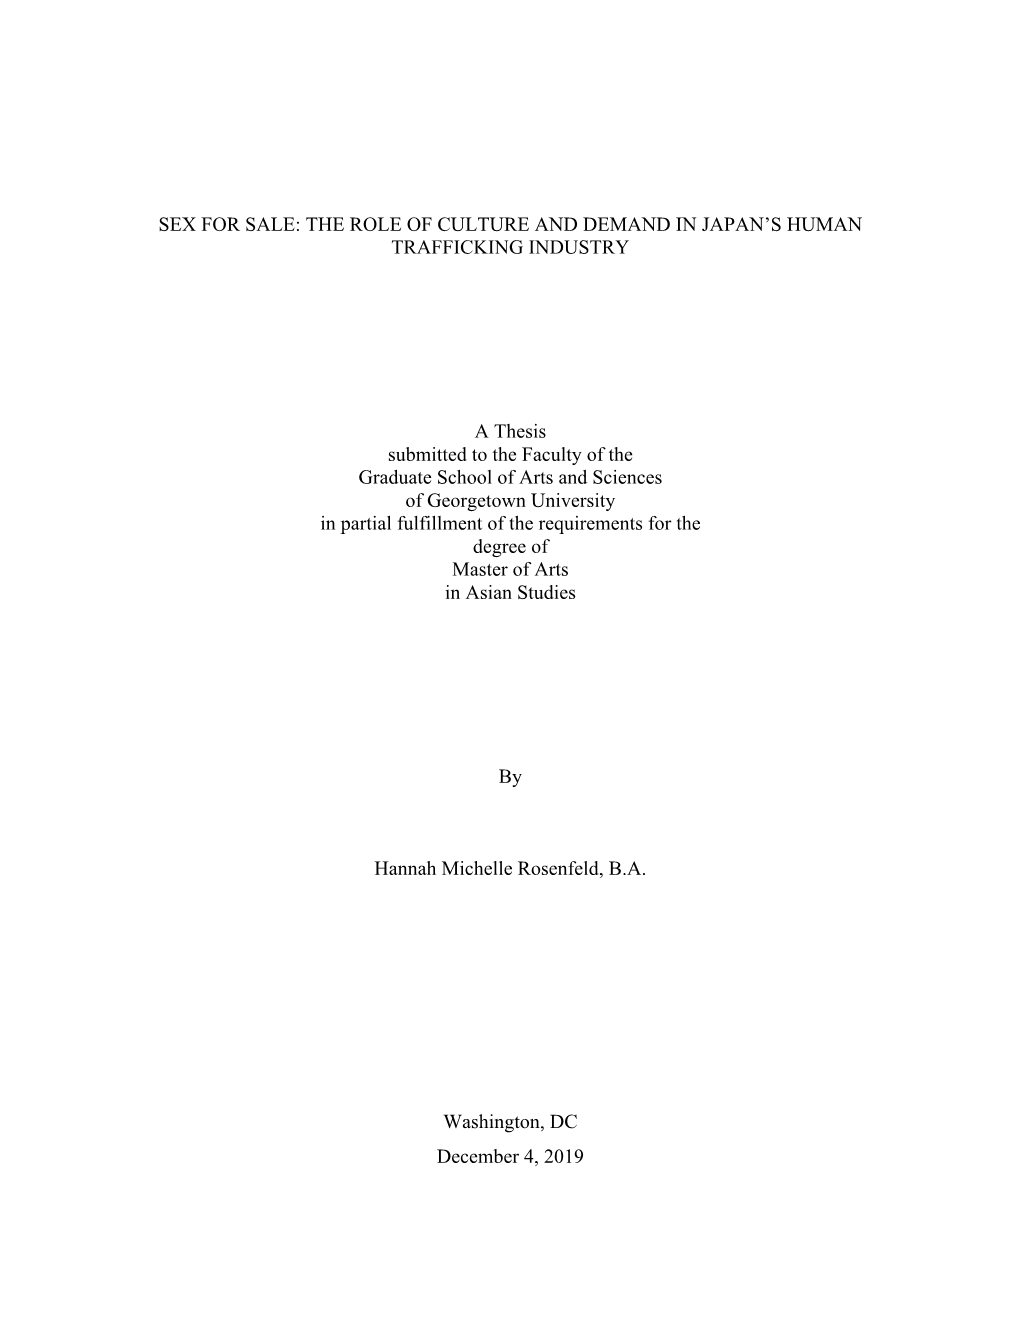 SEX for SALE: the ROLE of CULTURE and DEMAND in JAPAN's HUMAN TRAFFICKING INDUSTRY a Thesis Submitted to the Faculty of the Gr